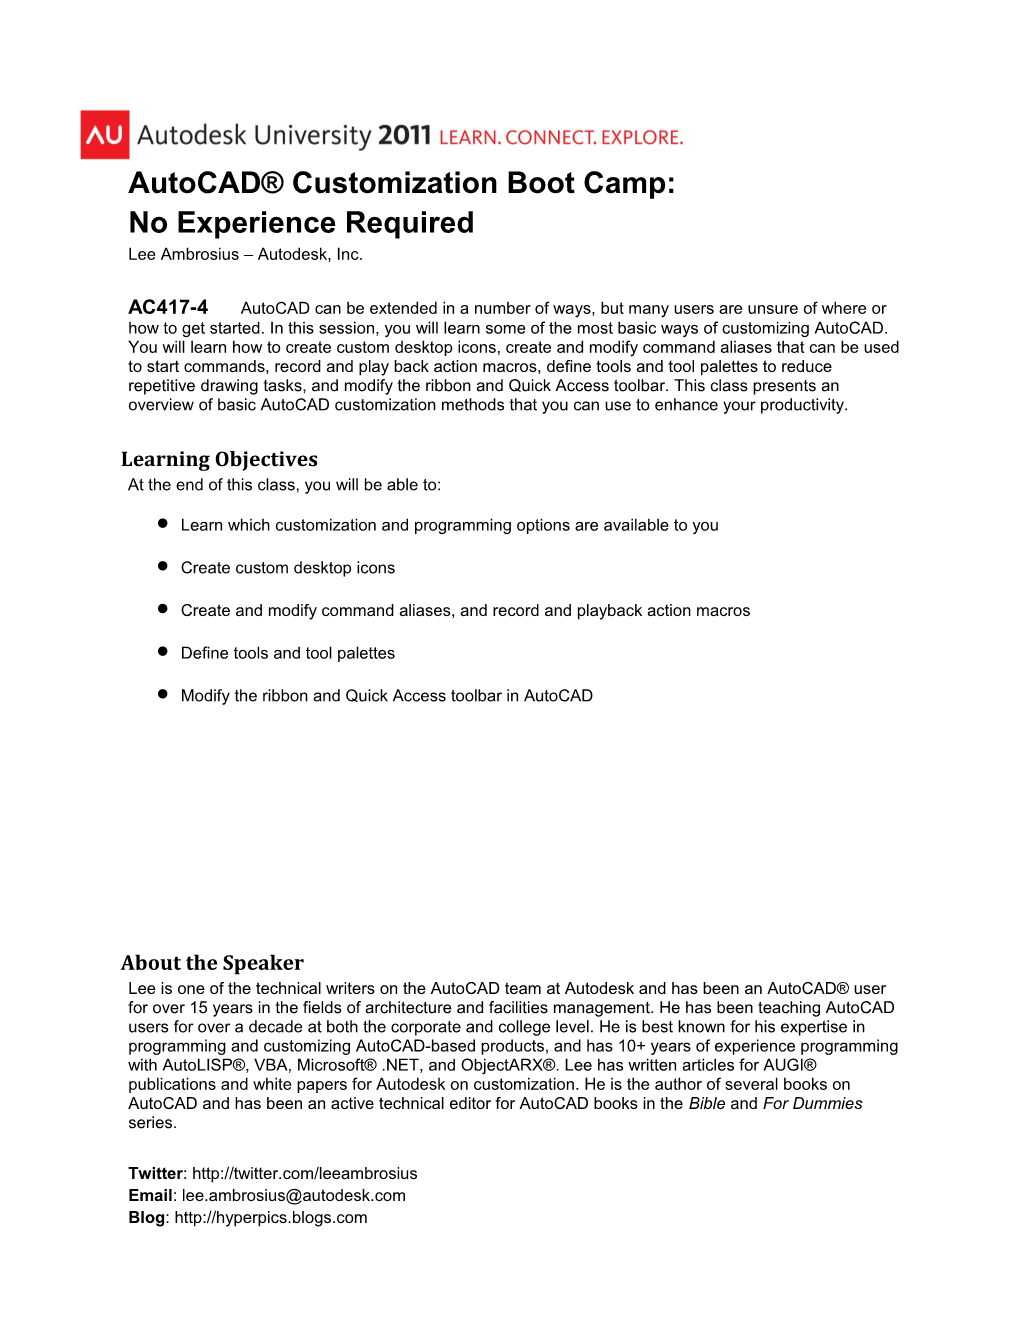 AC417-4: Autocad Customization Boot Camp: No Experience Required